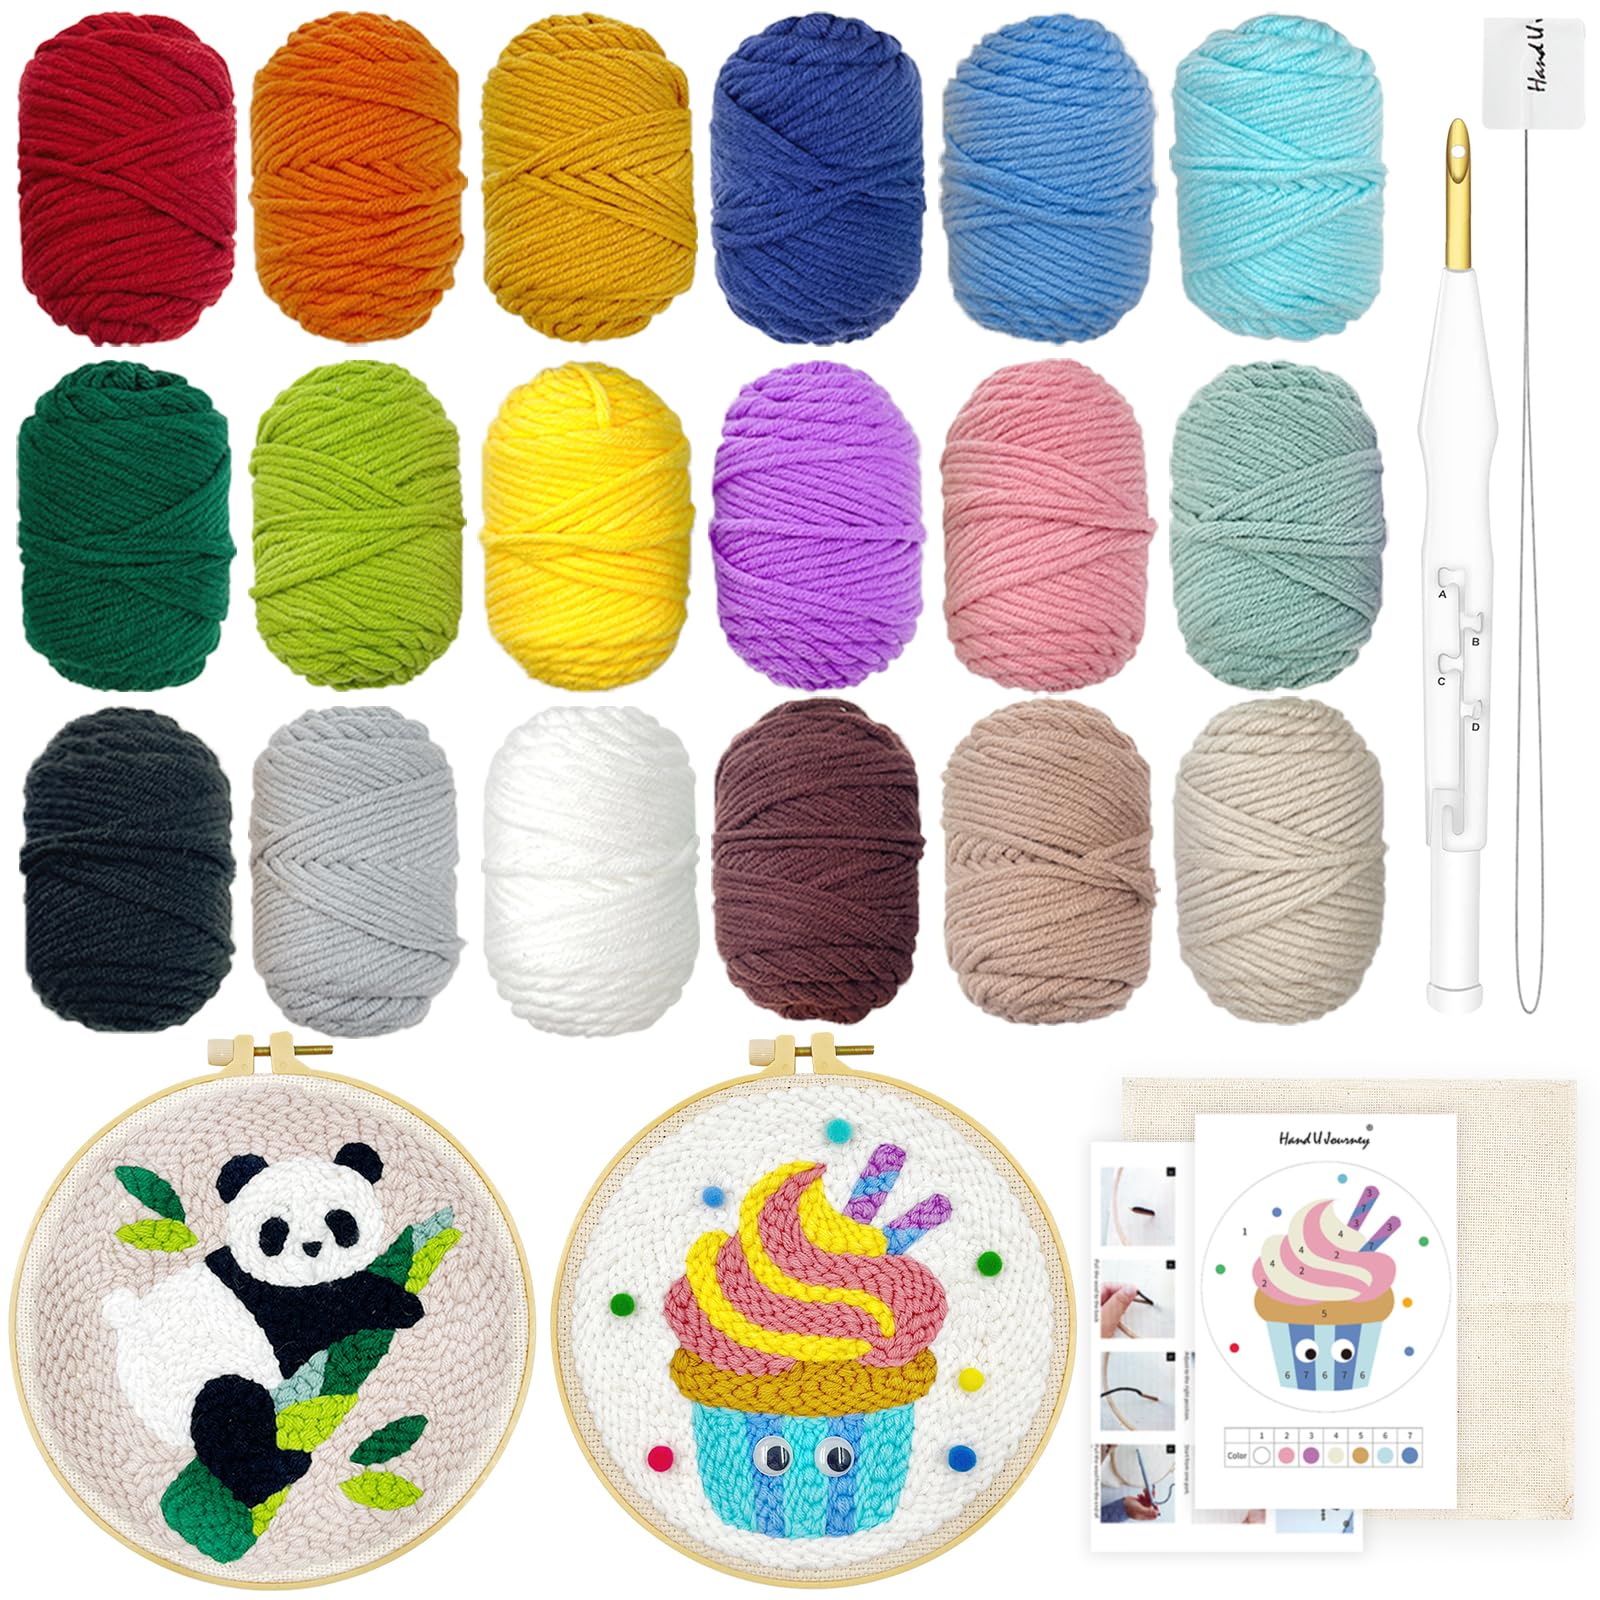 Punch Needle Kits for Adults Kids DIY Gifts - A Store Full of Joy and  Happiness